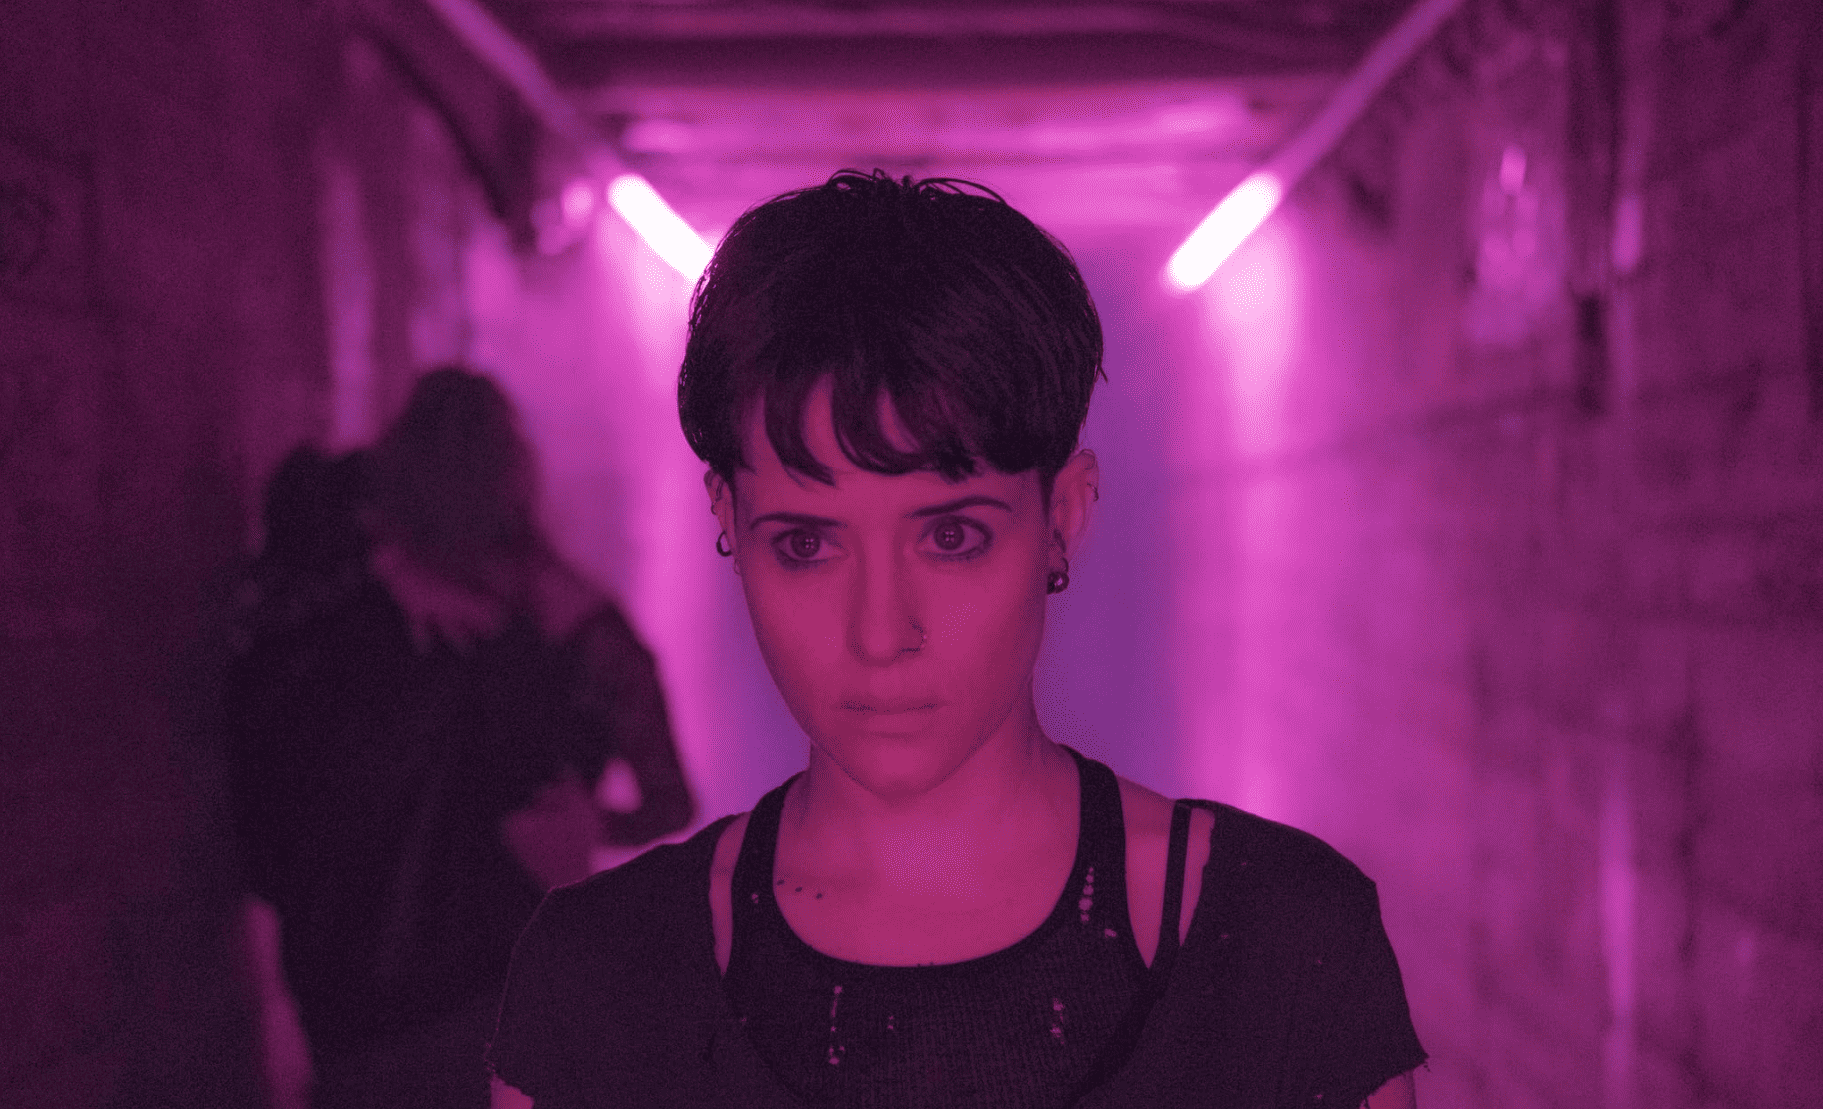  A woman walks down a pink-lit hallway in this image from Columbia Pictures.